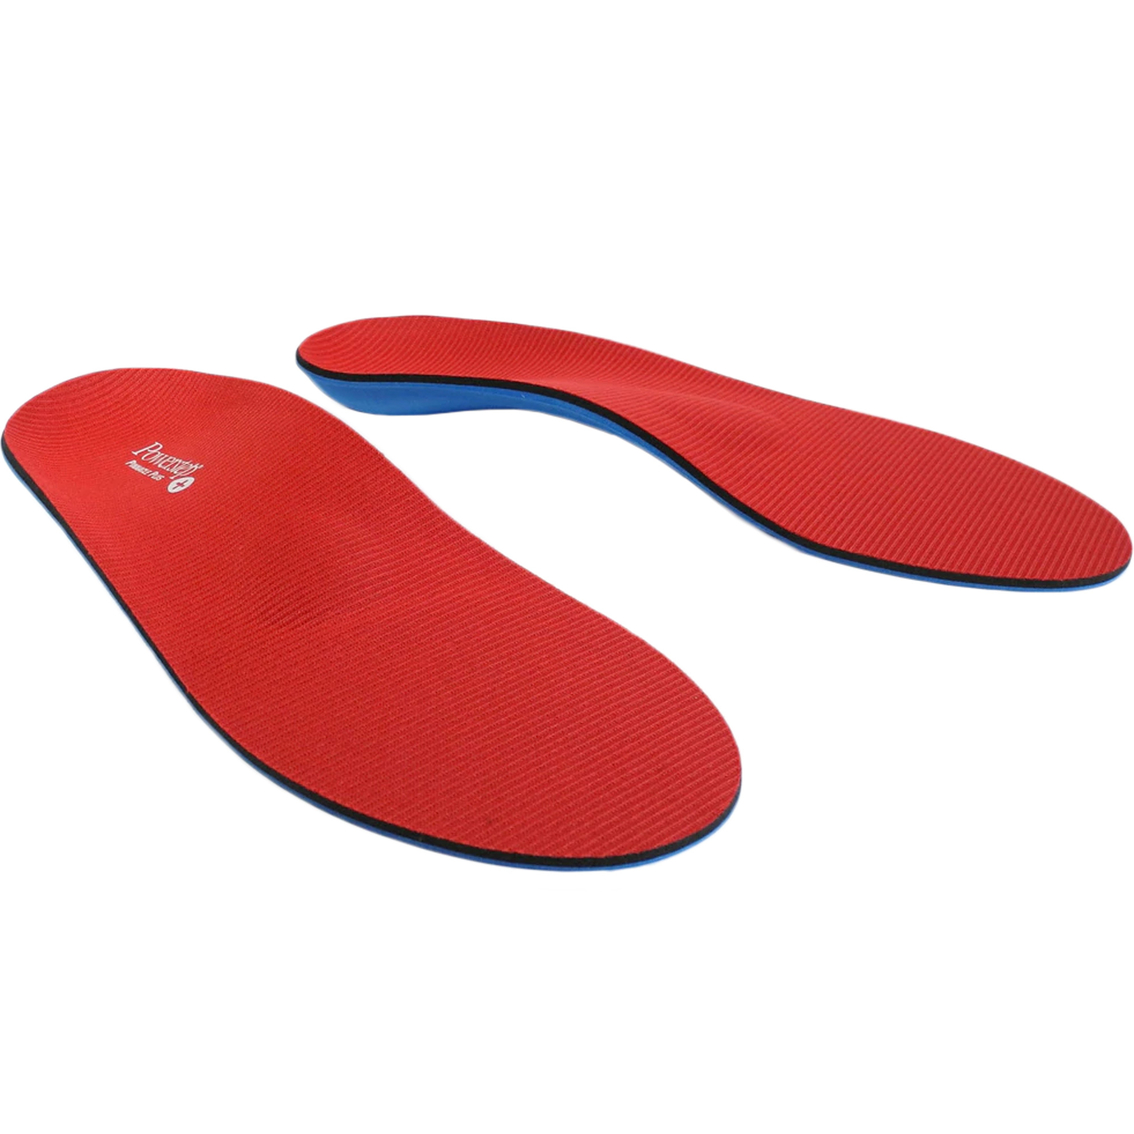 Powerstep Pinnacle Plus Full Length Orthotic Insoles with Metatarsal Support - Image 4 of 10